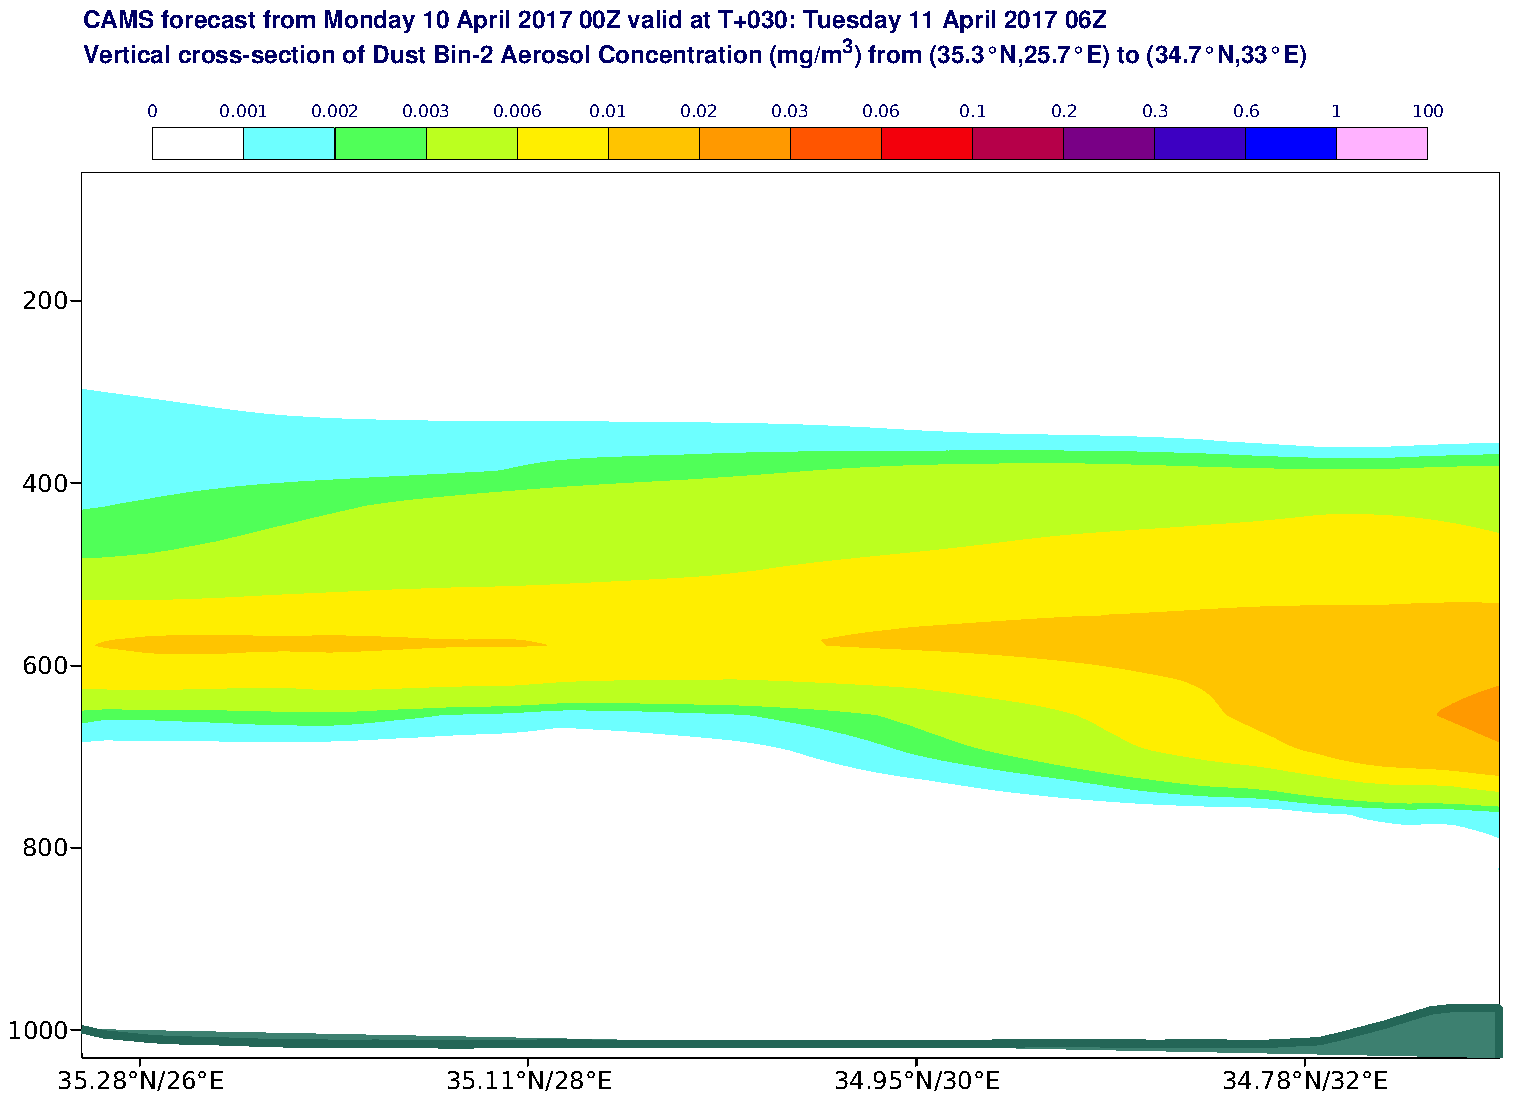 Vertical cross-section of Dust Bin-2 Aerosol Concentration (mg/m3) valid at T30 - 2017-04-11 06:00